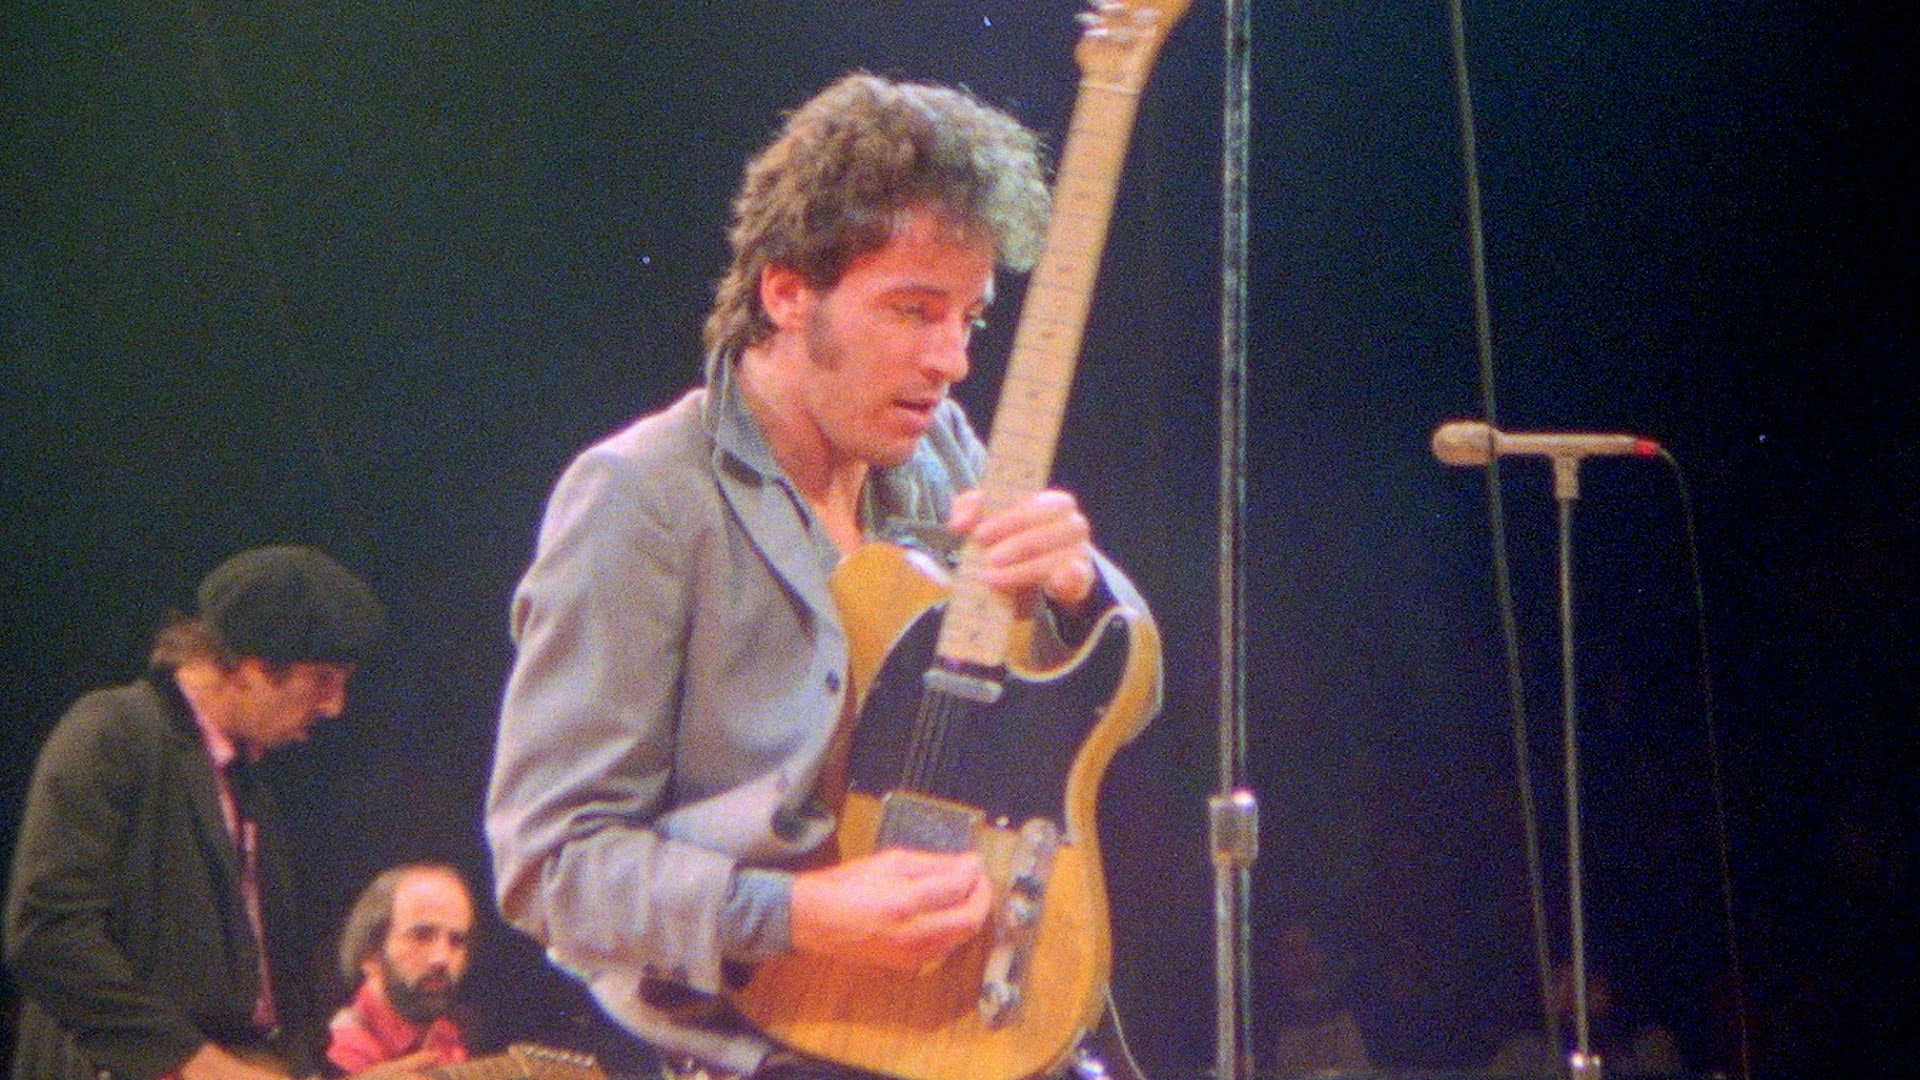 Bruce Springsteen and the E Street Band - 1979 No Nukes Concerts